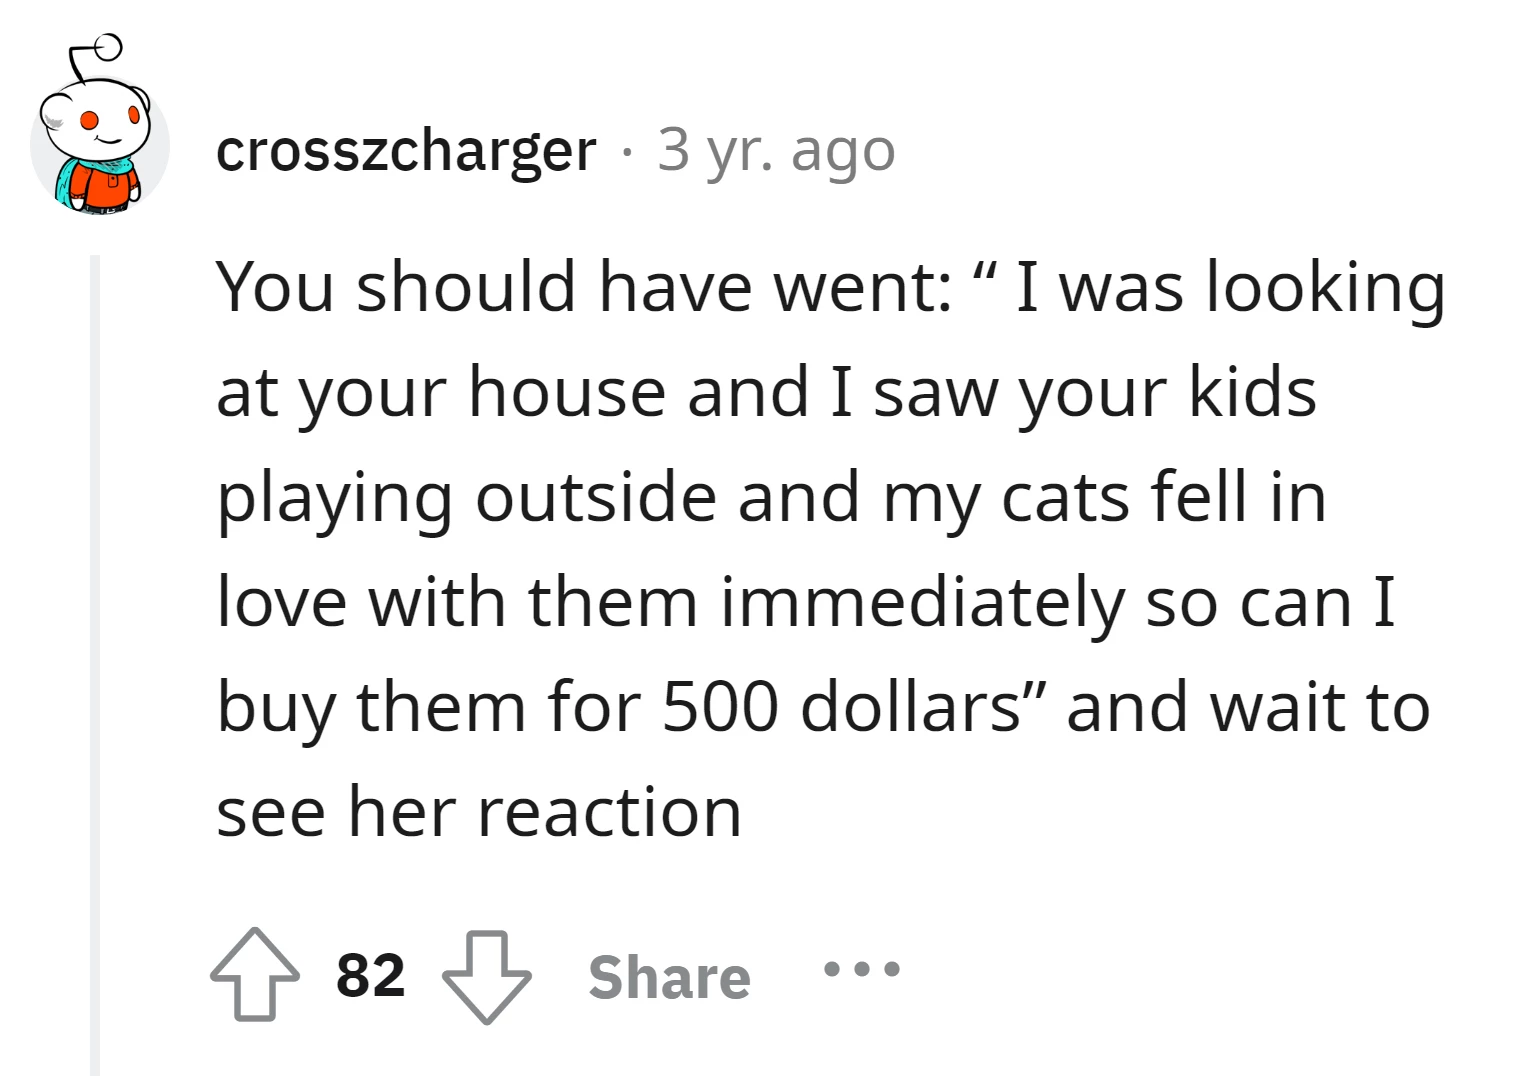 The OP should have turned the situation around by offering to buy the entitled mom's kids